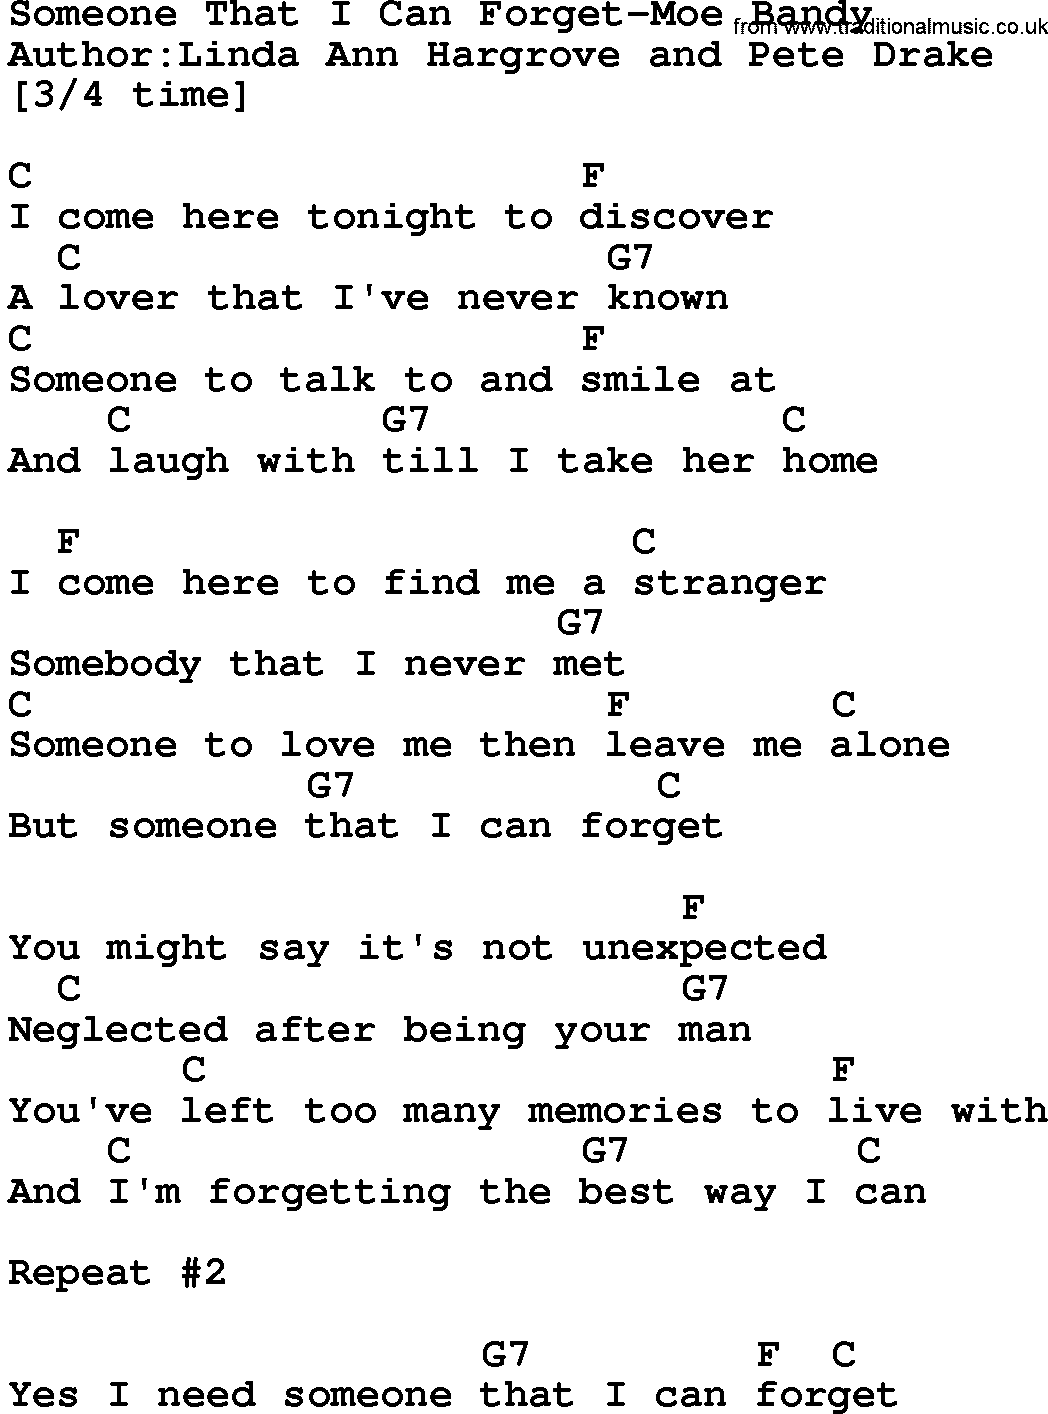 Country music song: Someone That I Can Forget-Moe Bandy lyrics and chords